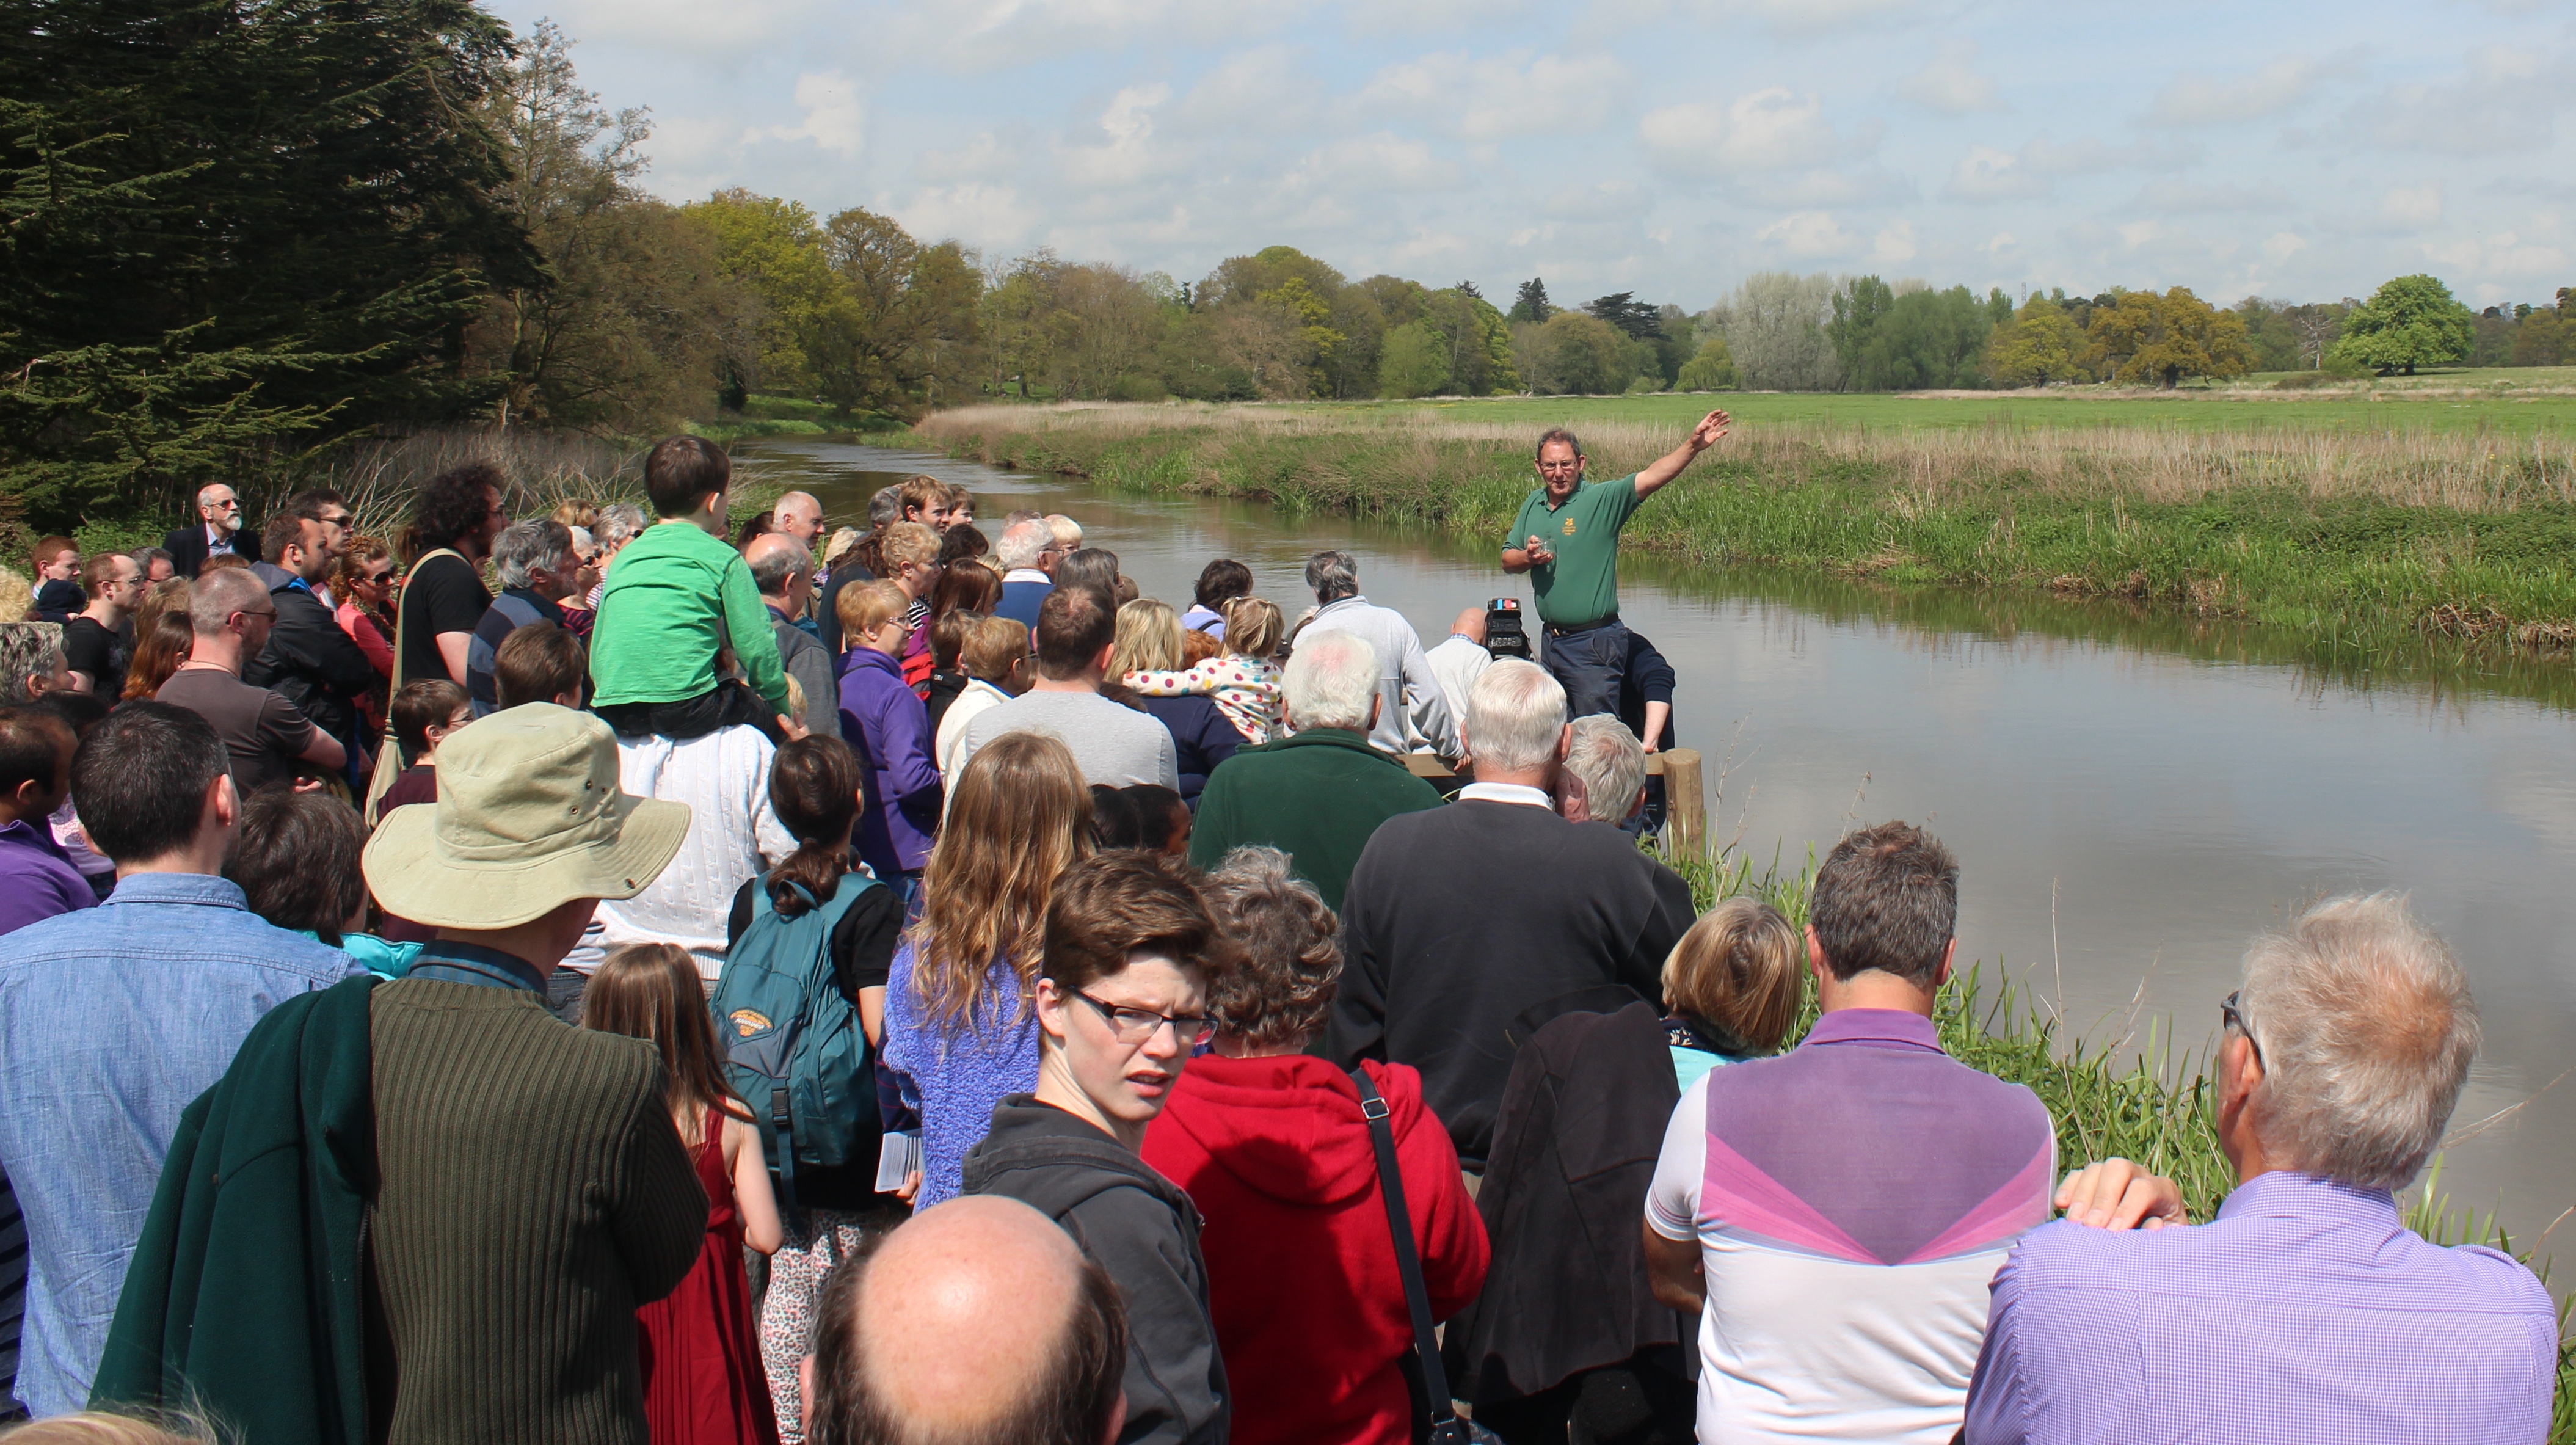 Bob Thurston of the National Trust addressed the crowds